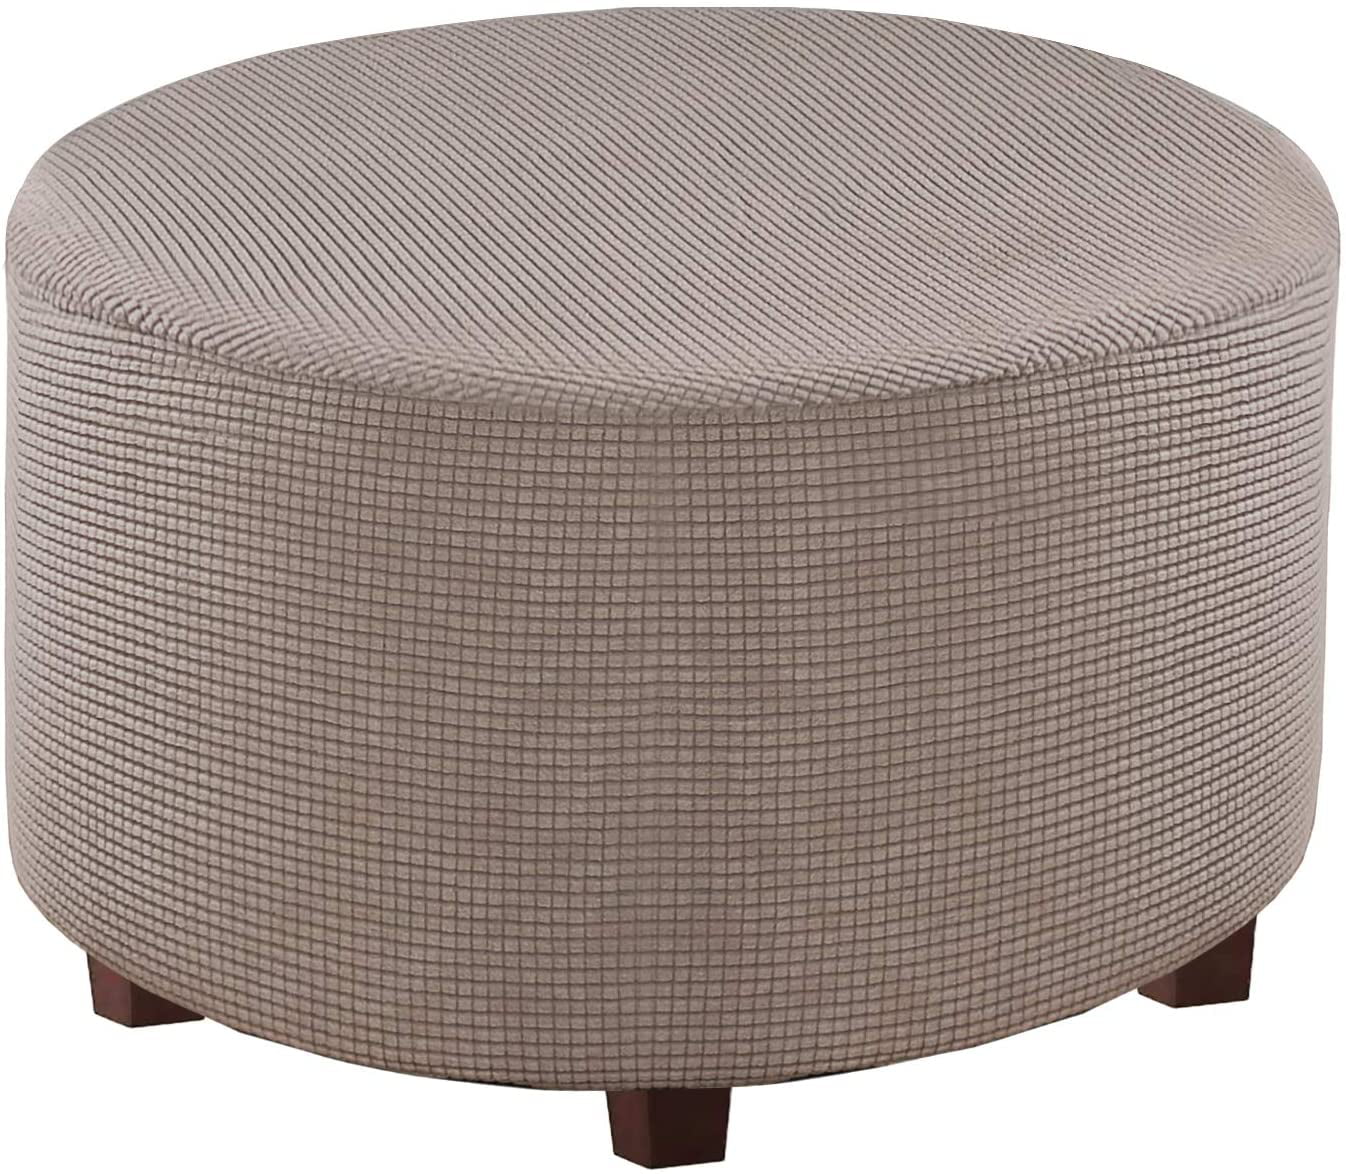 Details about   Soft Simple Chair Ottoman Cover Footstool Cover Round Slipcover Stretch 